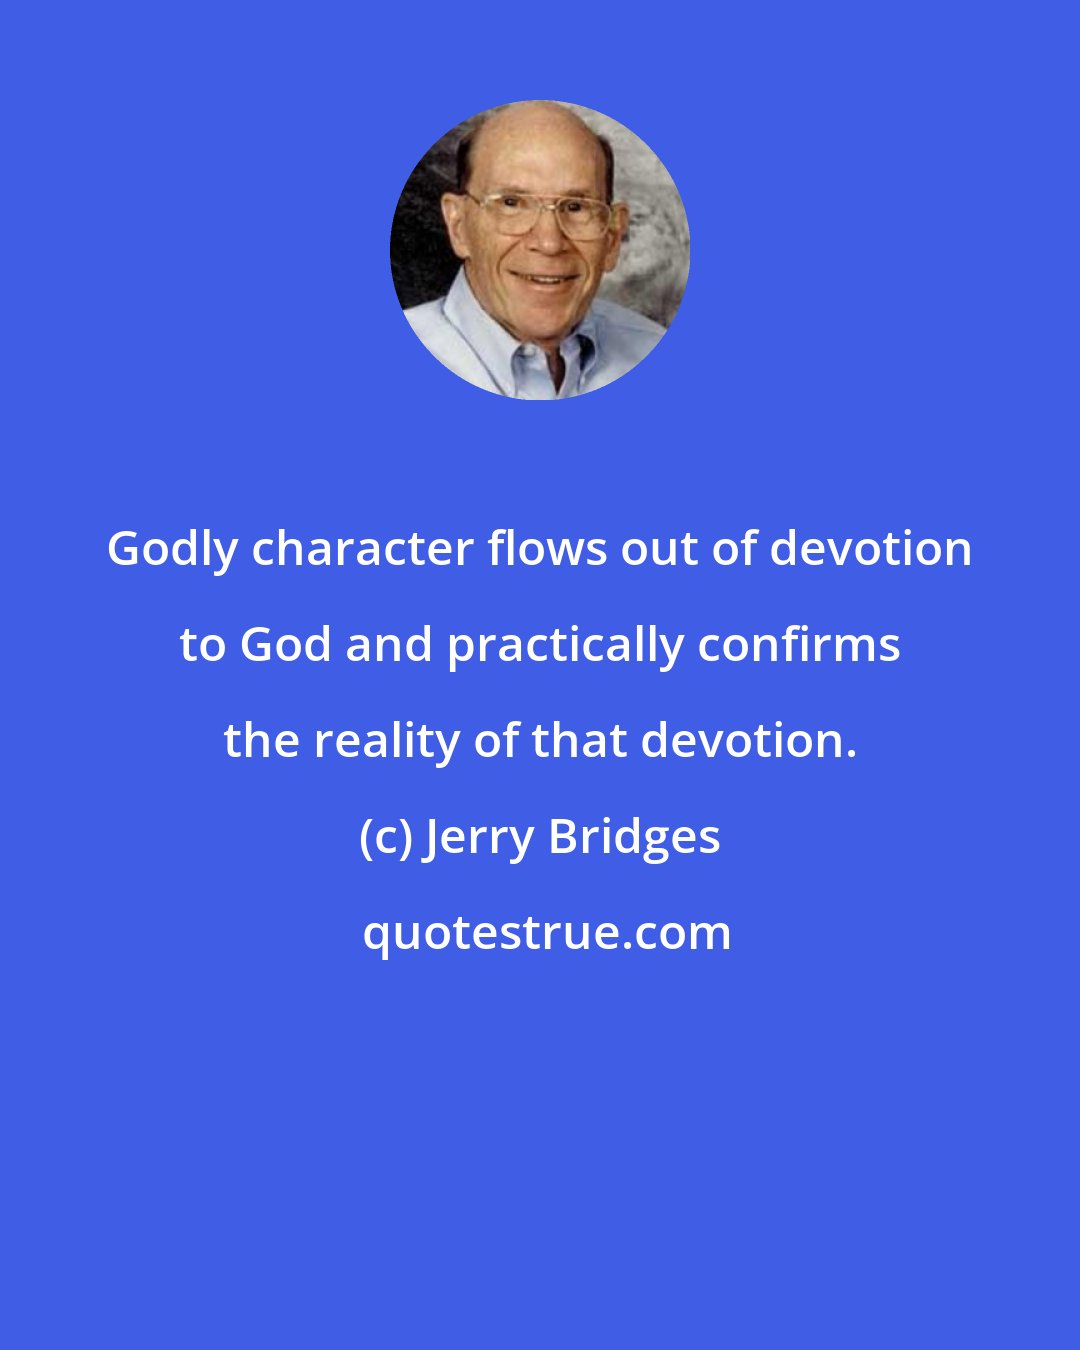 Jerry Bridges: Godly character flows out of devotion to God and practically confirms the reality of that devotion.